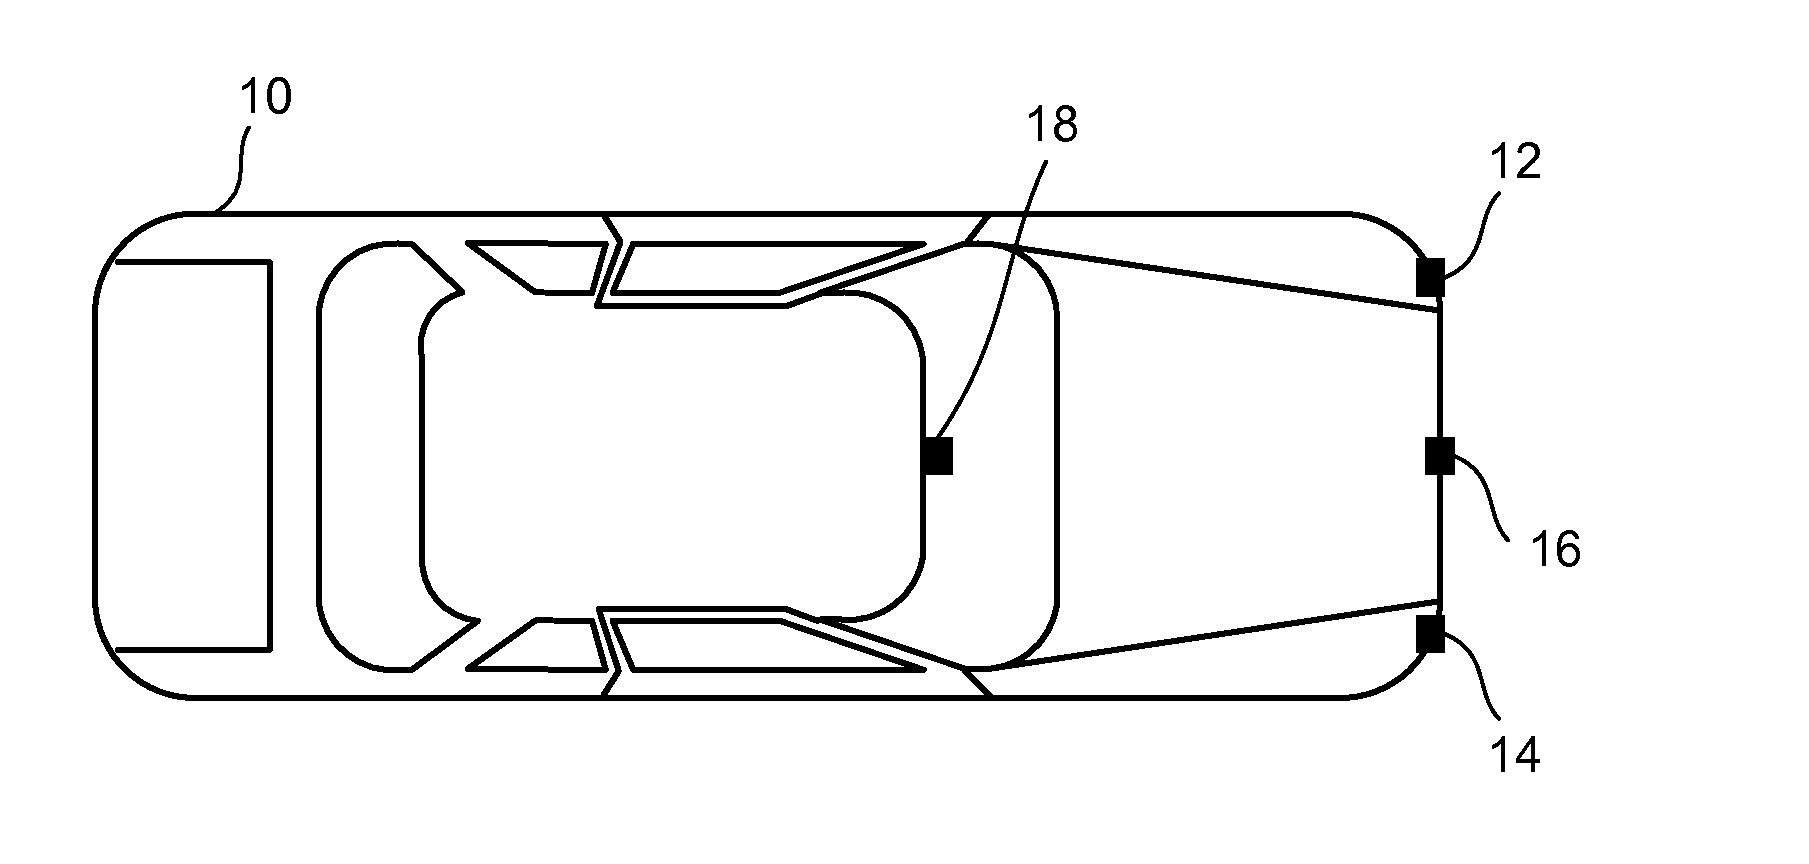 Sensor alignment process and tools for active safety vehicle applications